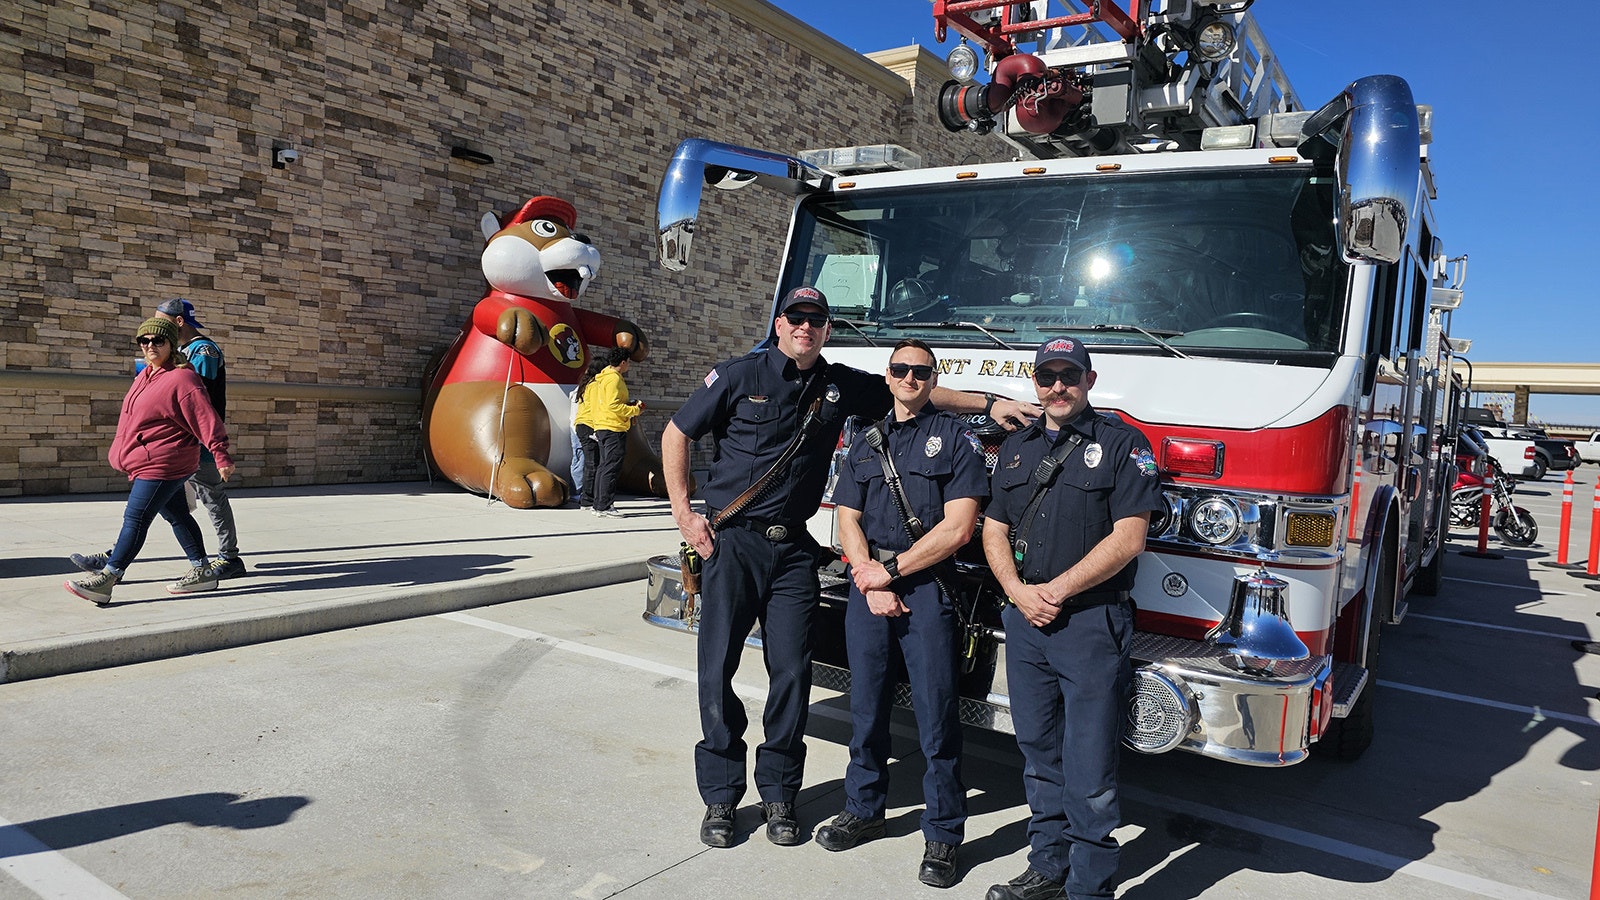 Jay Beine, from left, Connor Covillo and Dustin Easley were on standby outside of Buc-ee's in Johnstown, Colorado, just in case of an emergency with so many people on site at once.